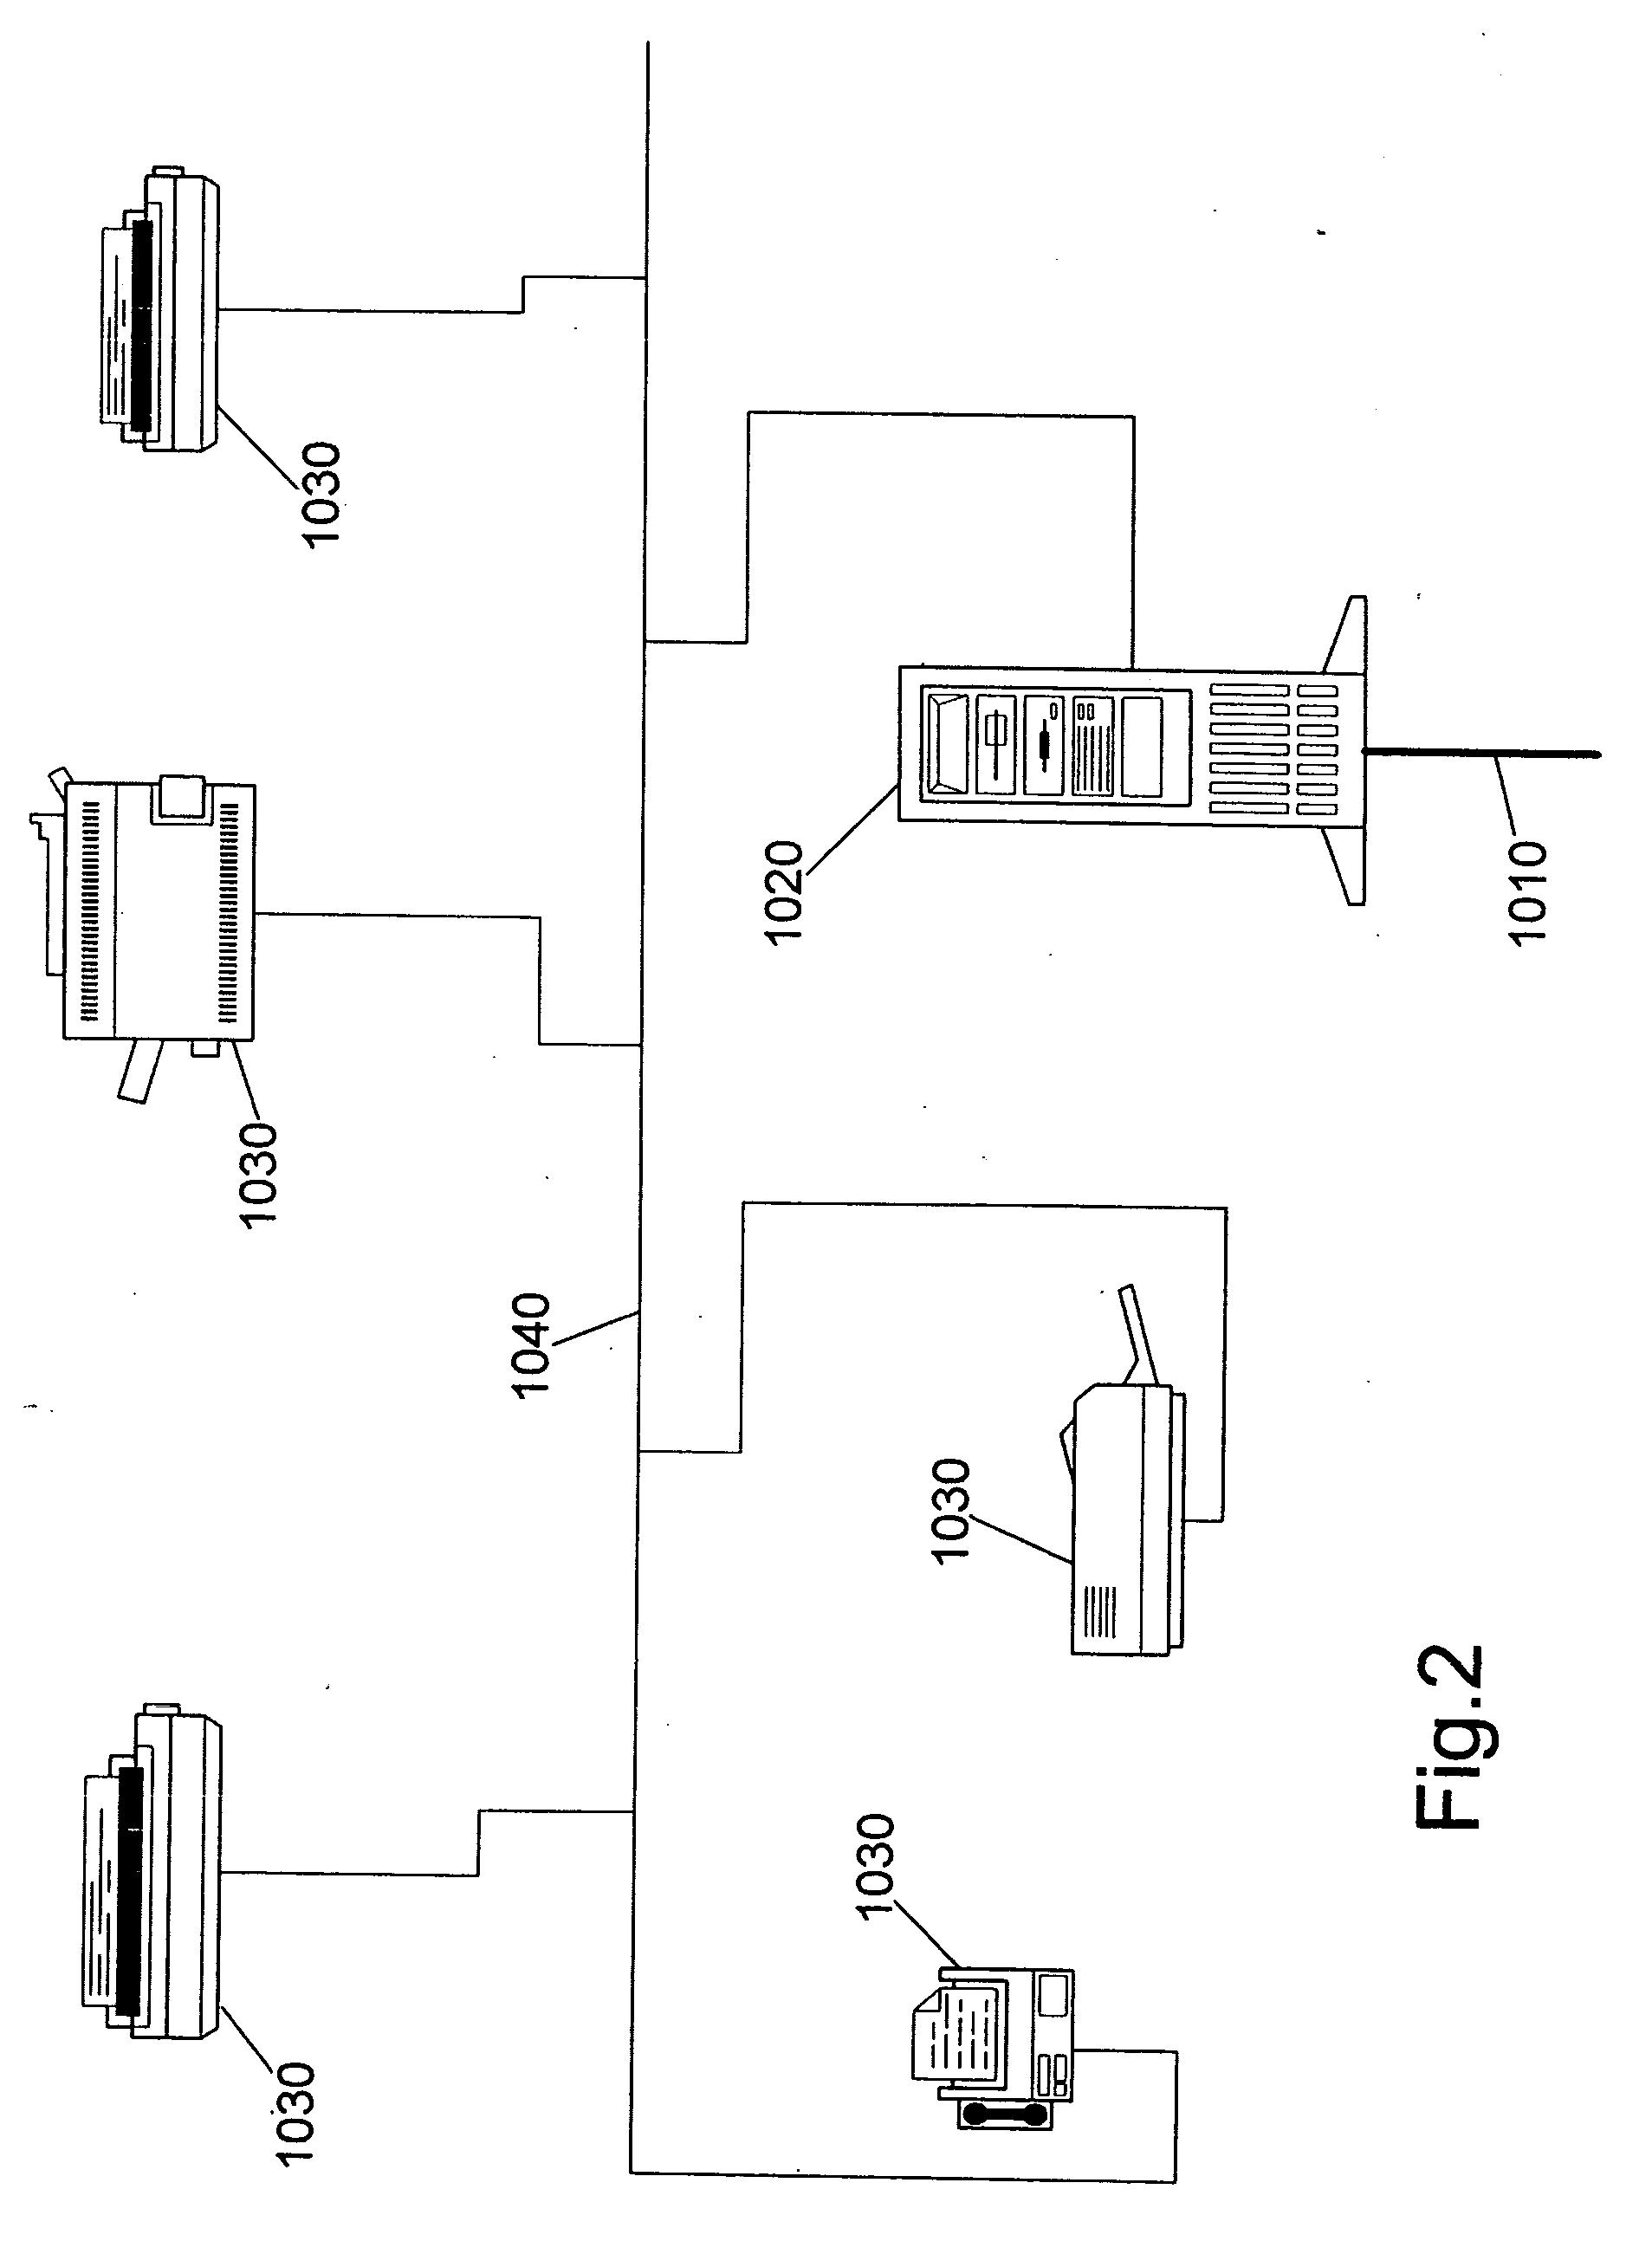 Method and apparatus for managing printing devices